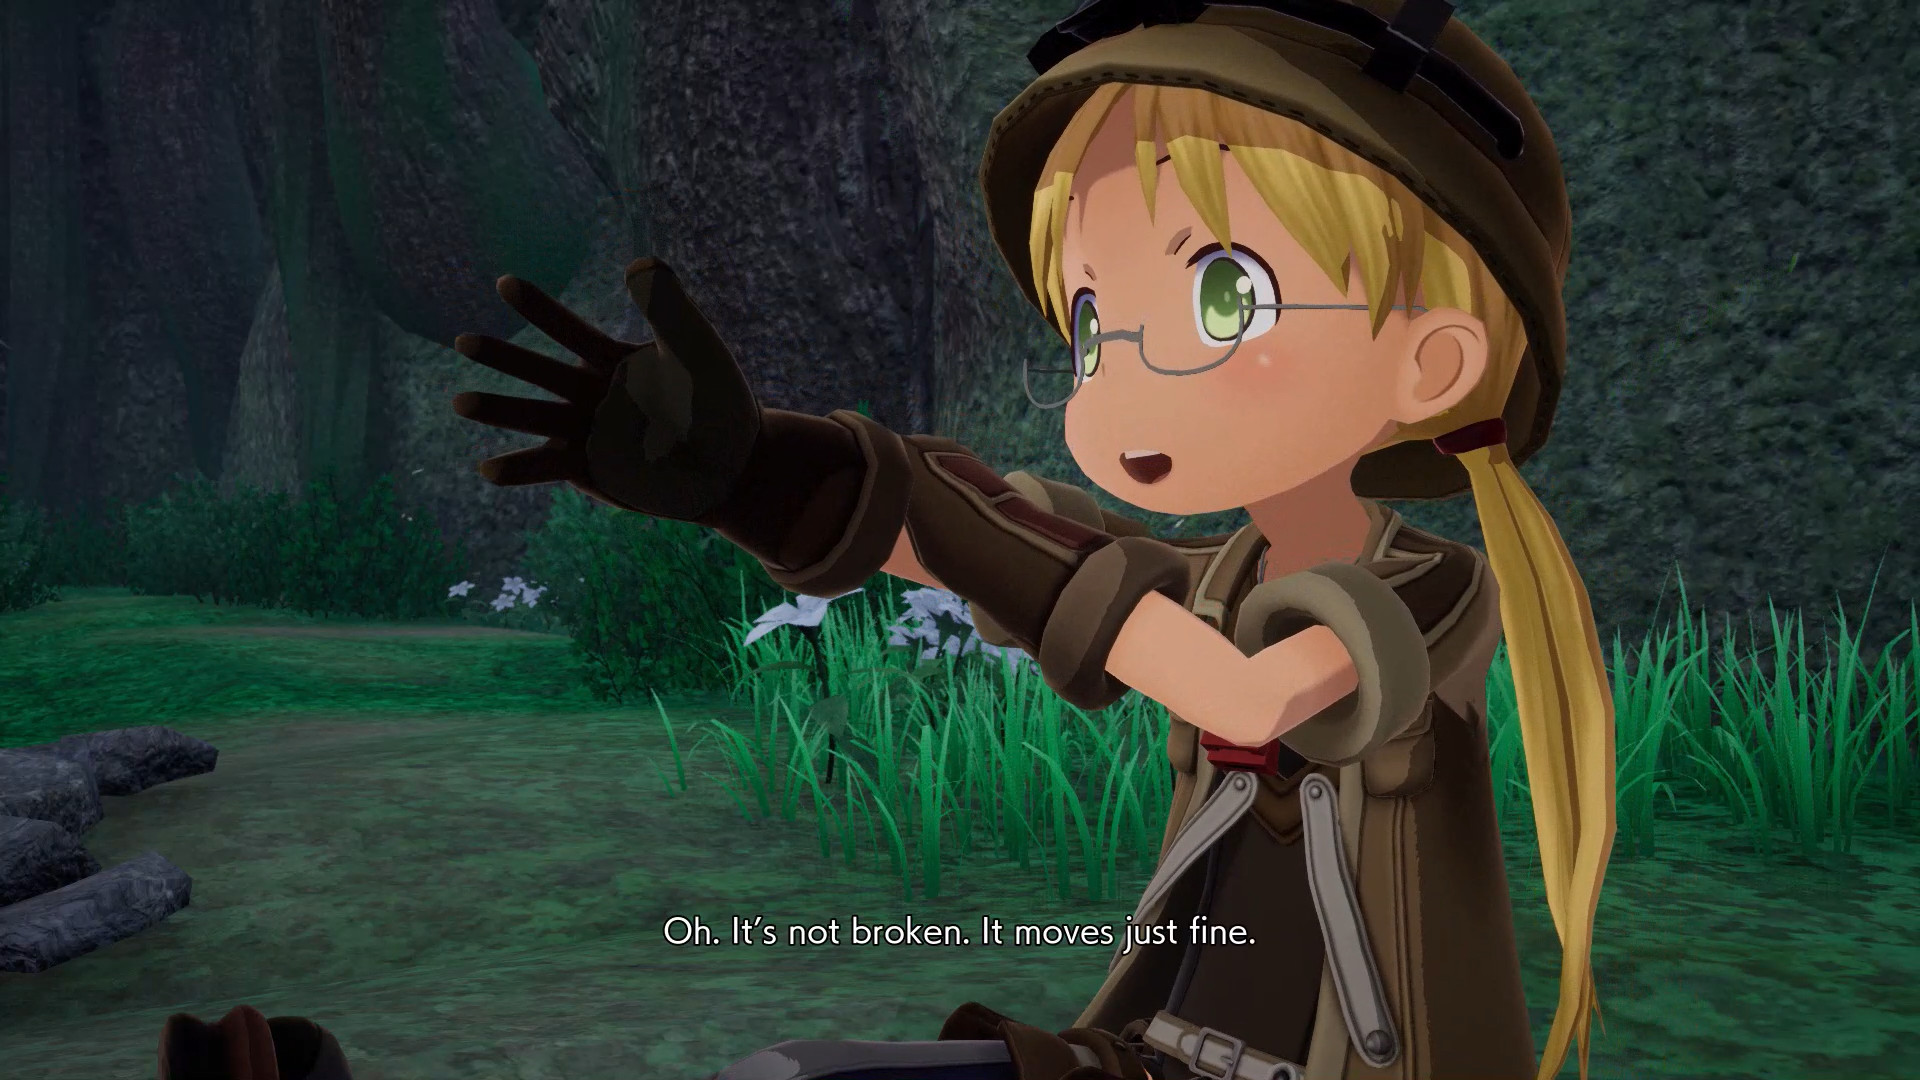 Made in Abyss Season 3 Trailer Confirms Return of his Epic Anime